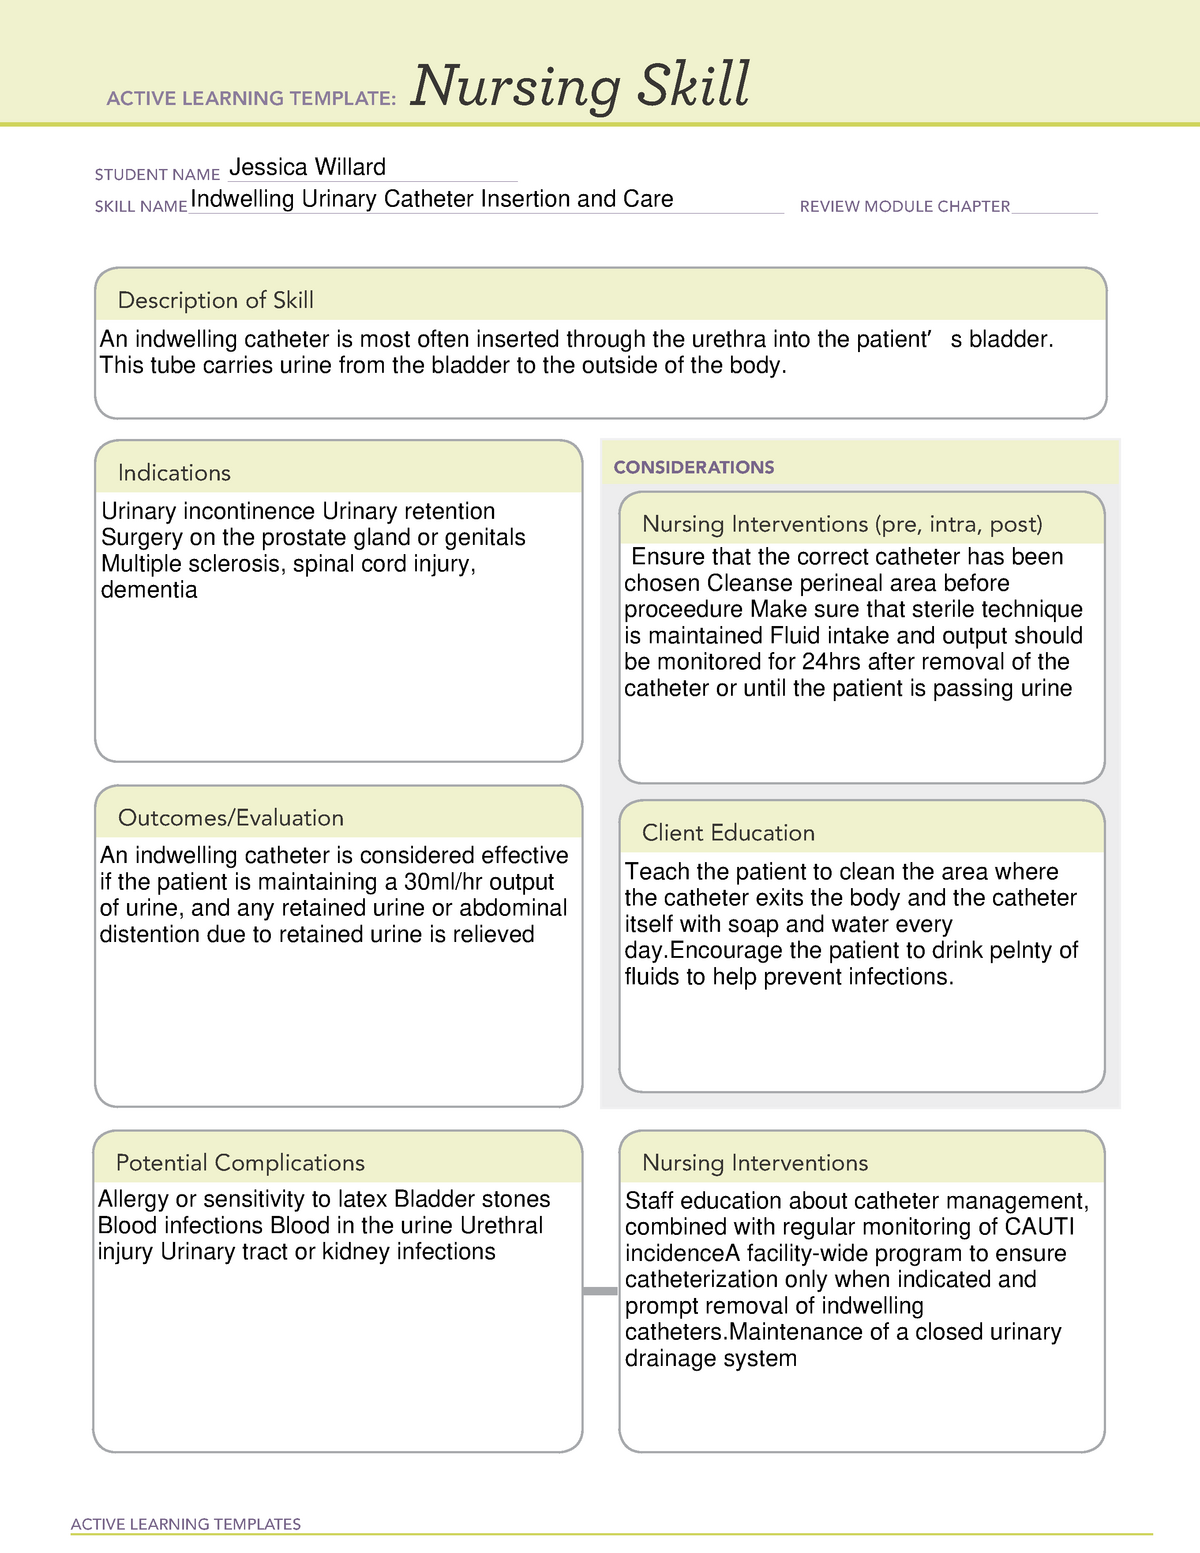 Indwelling Urinary Catheter Insertion And Care ACTIVE LEARNING TEMPLATES Nursing Skill STUDENT